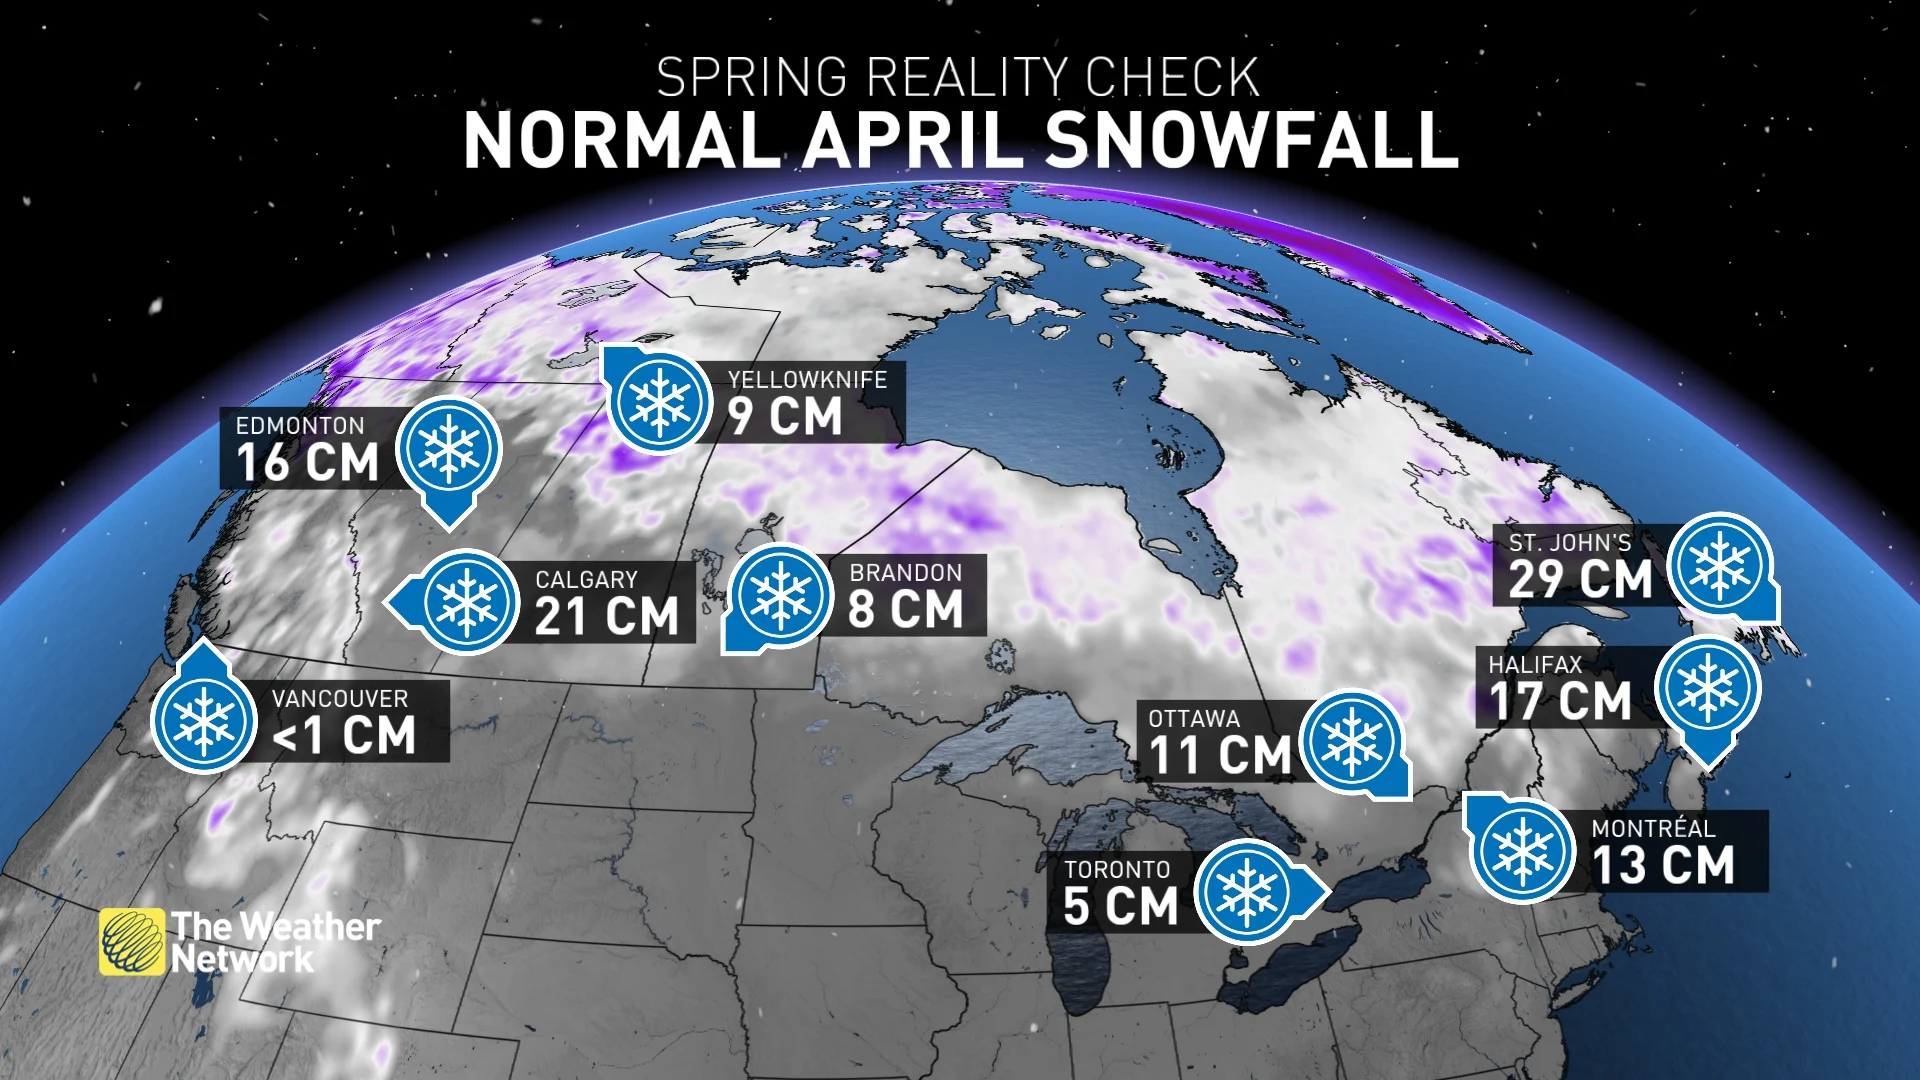 Spring reality check: April snowfall is normal in Canada